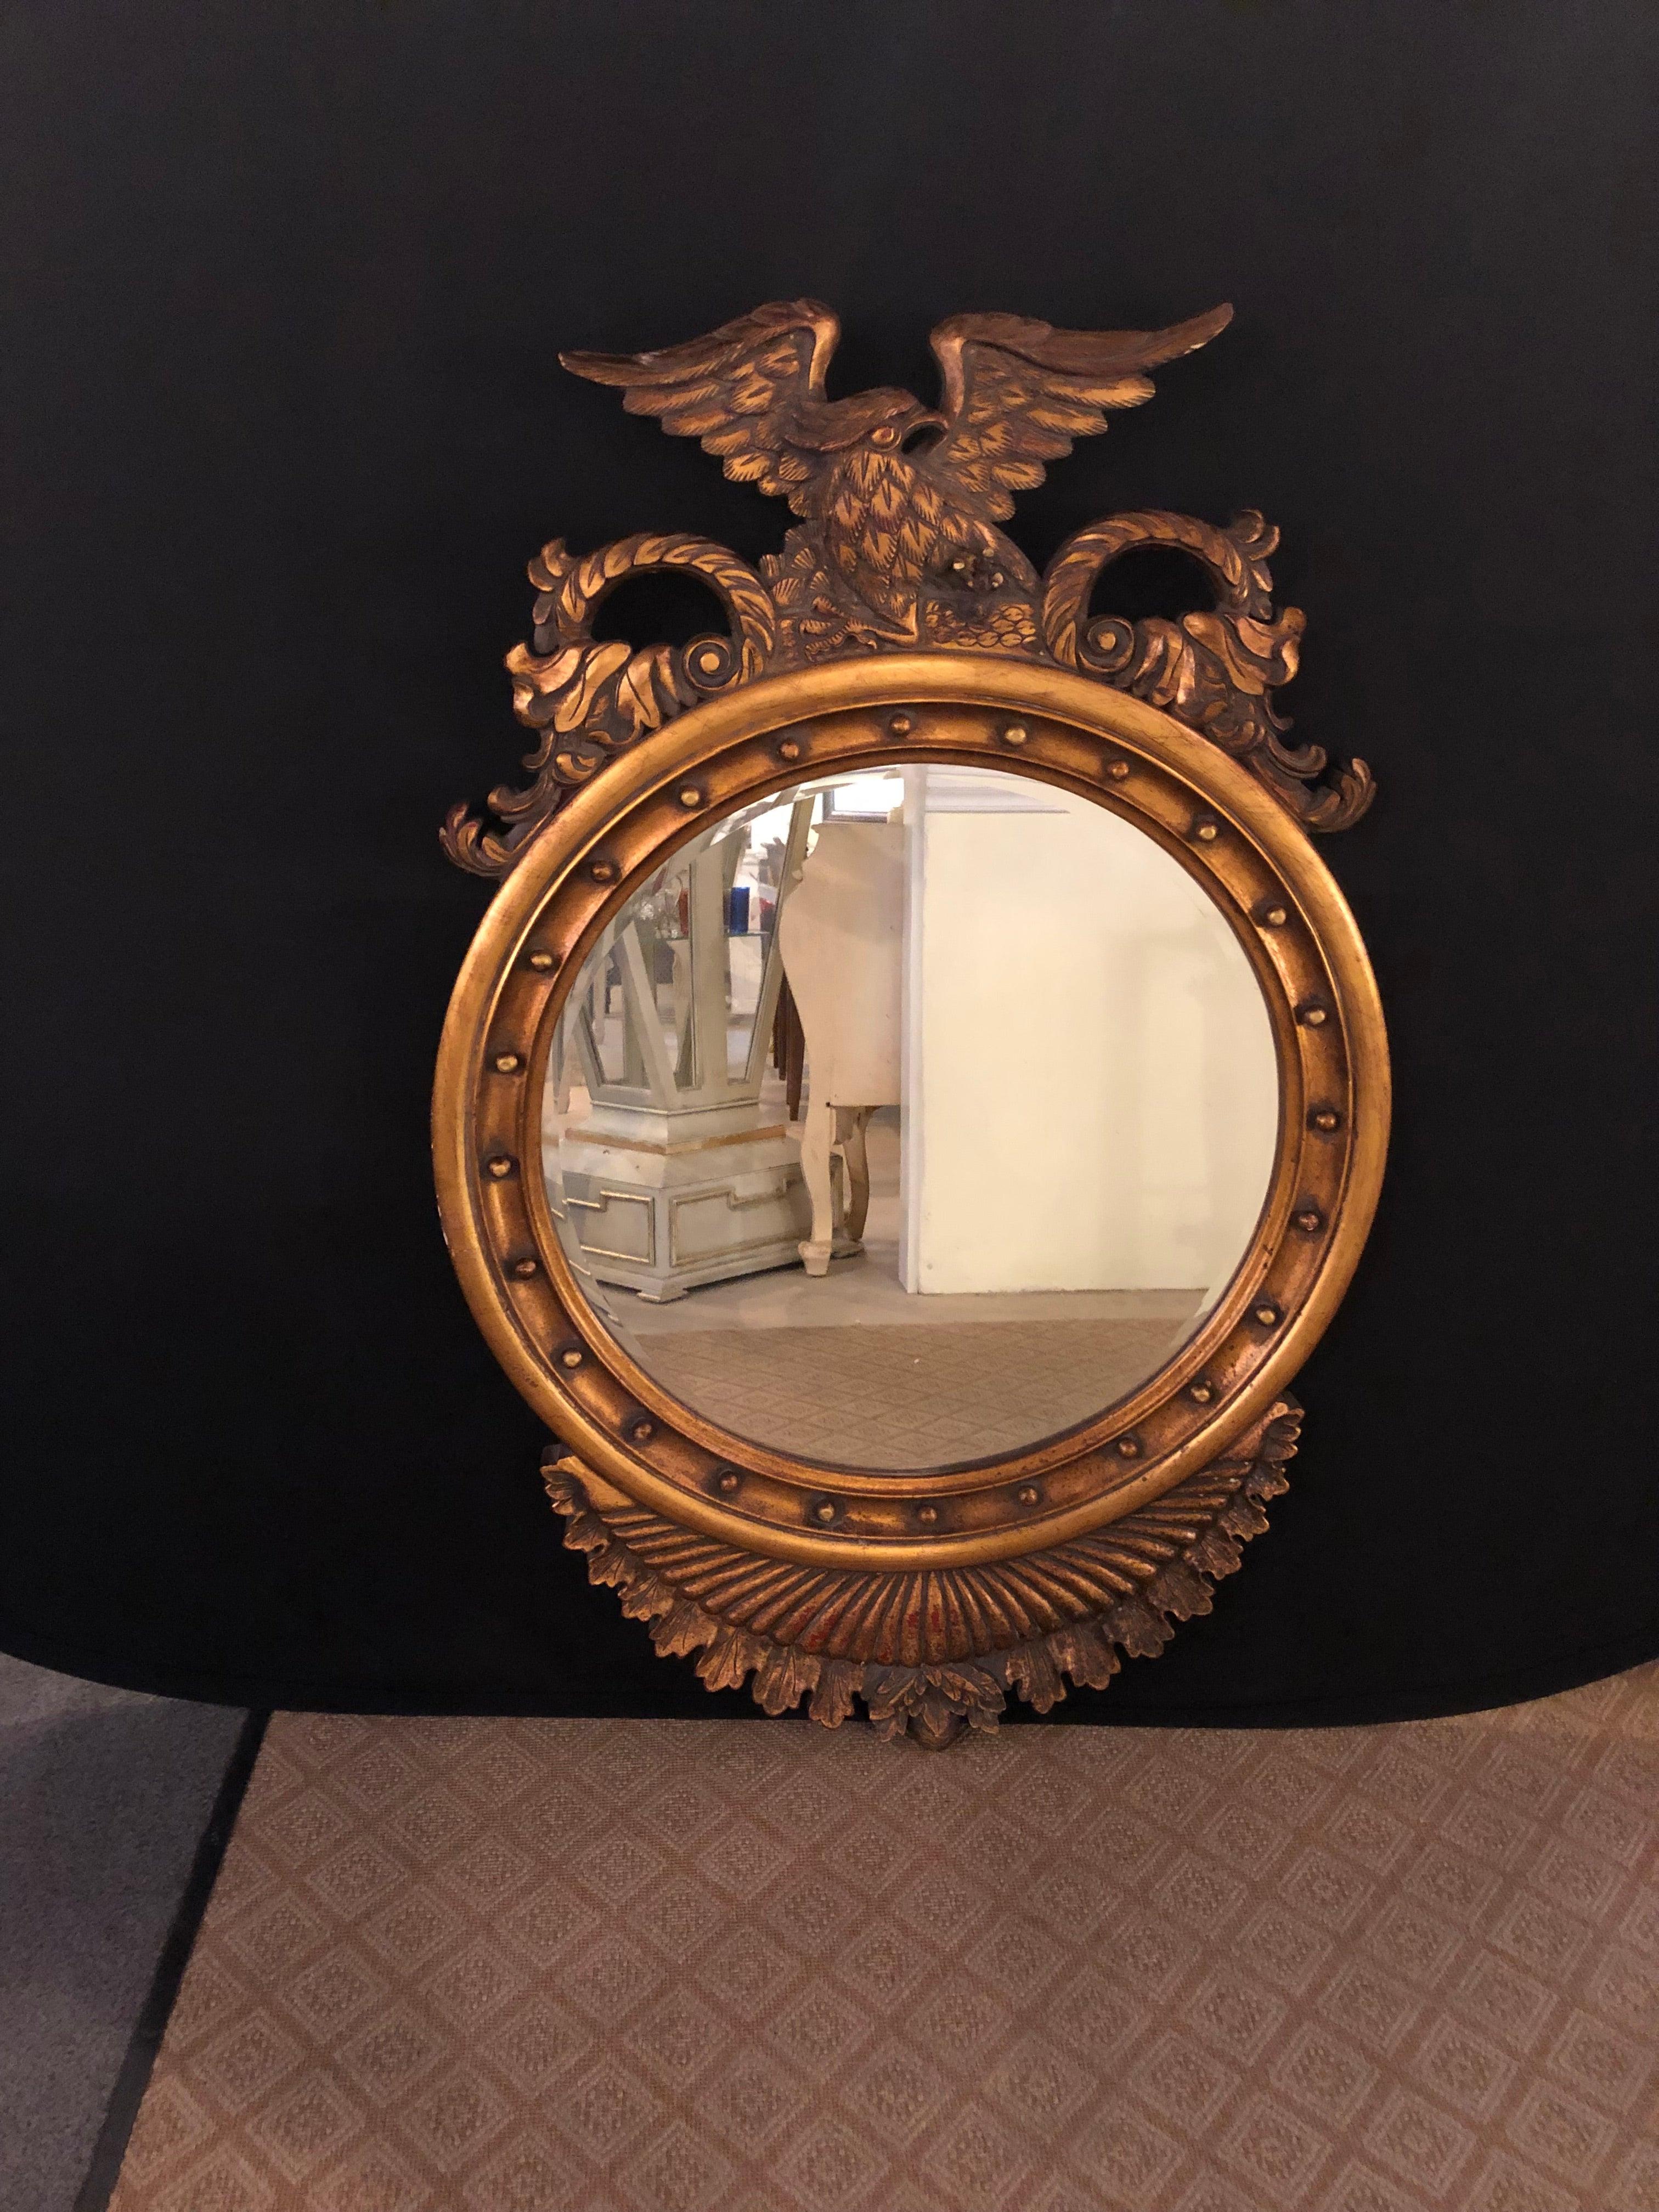 Federal style eagle crested circular wall or console mirror. The finely carved winged eagle over a circular frame in gilt wood decorated with balls around the clear mirror center. The bottom with feather carvings.